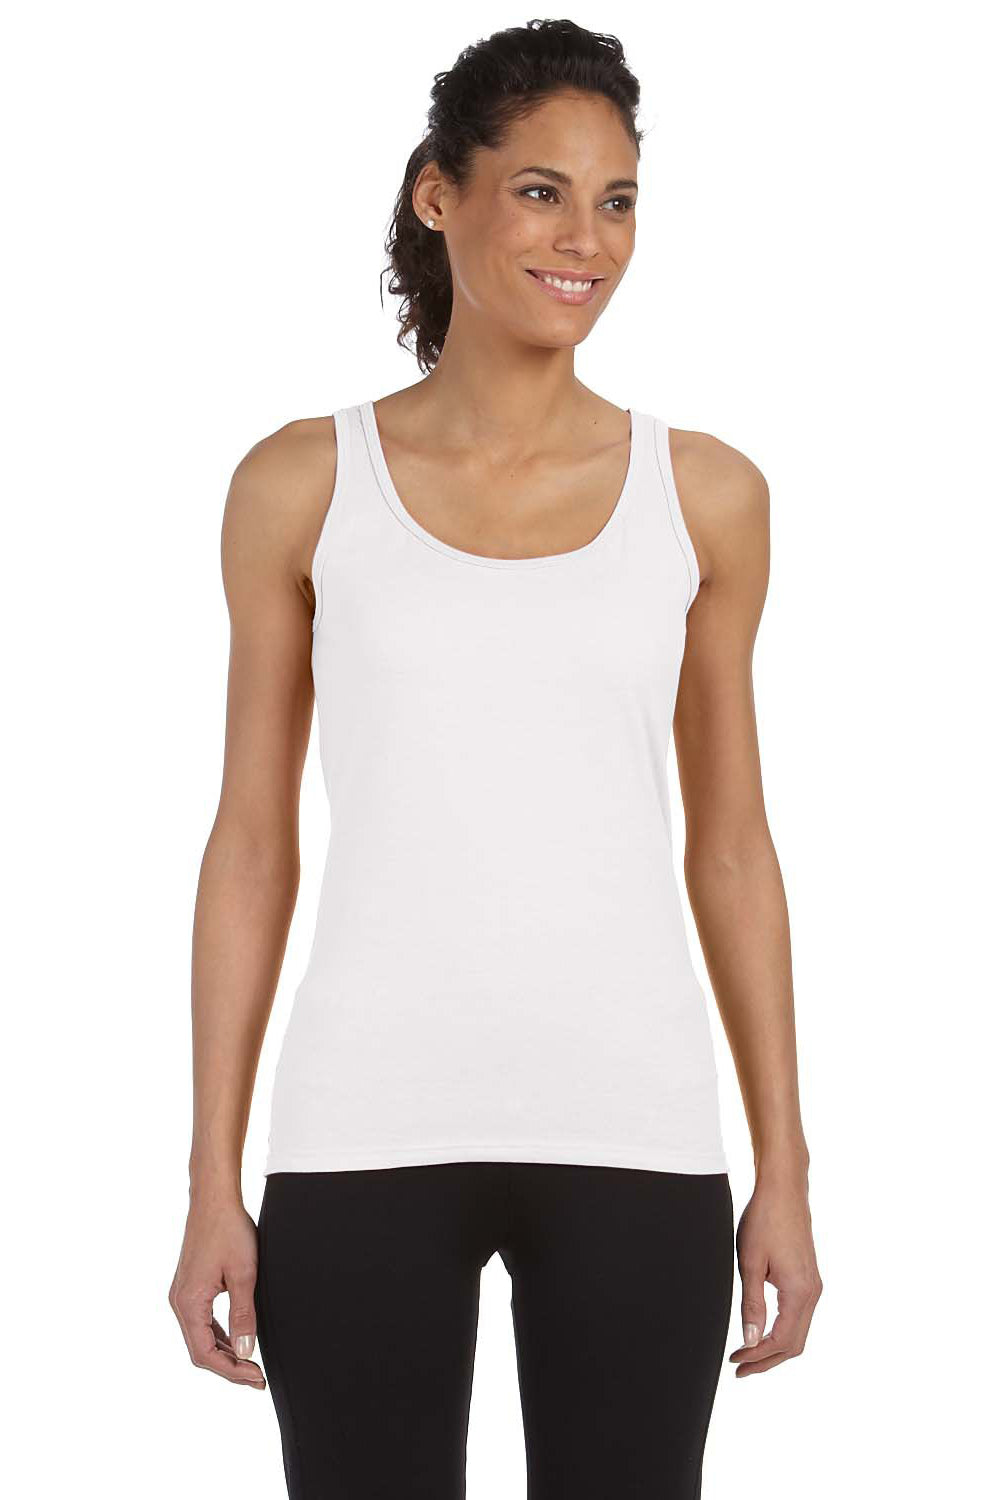 Gildan G642L Womens Softstyle Tank Top White Front